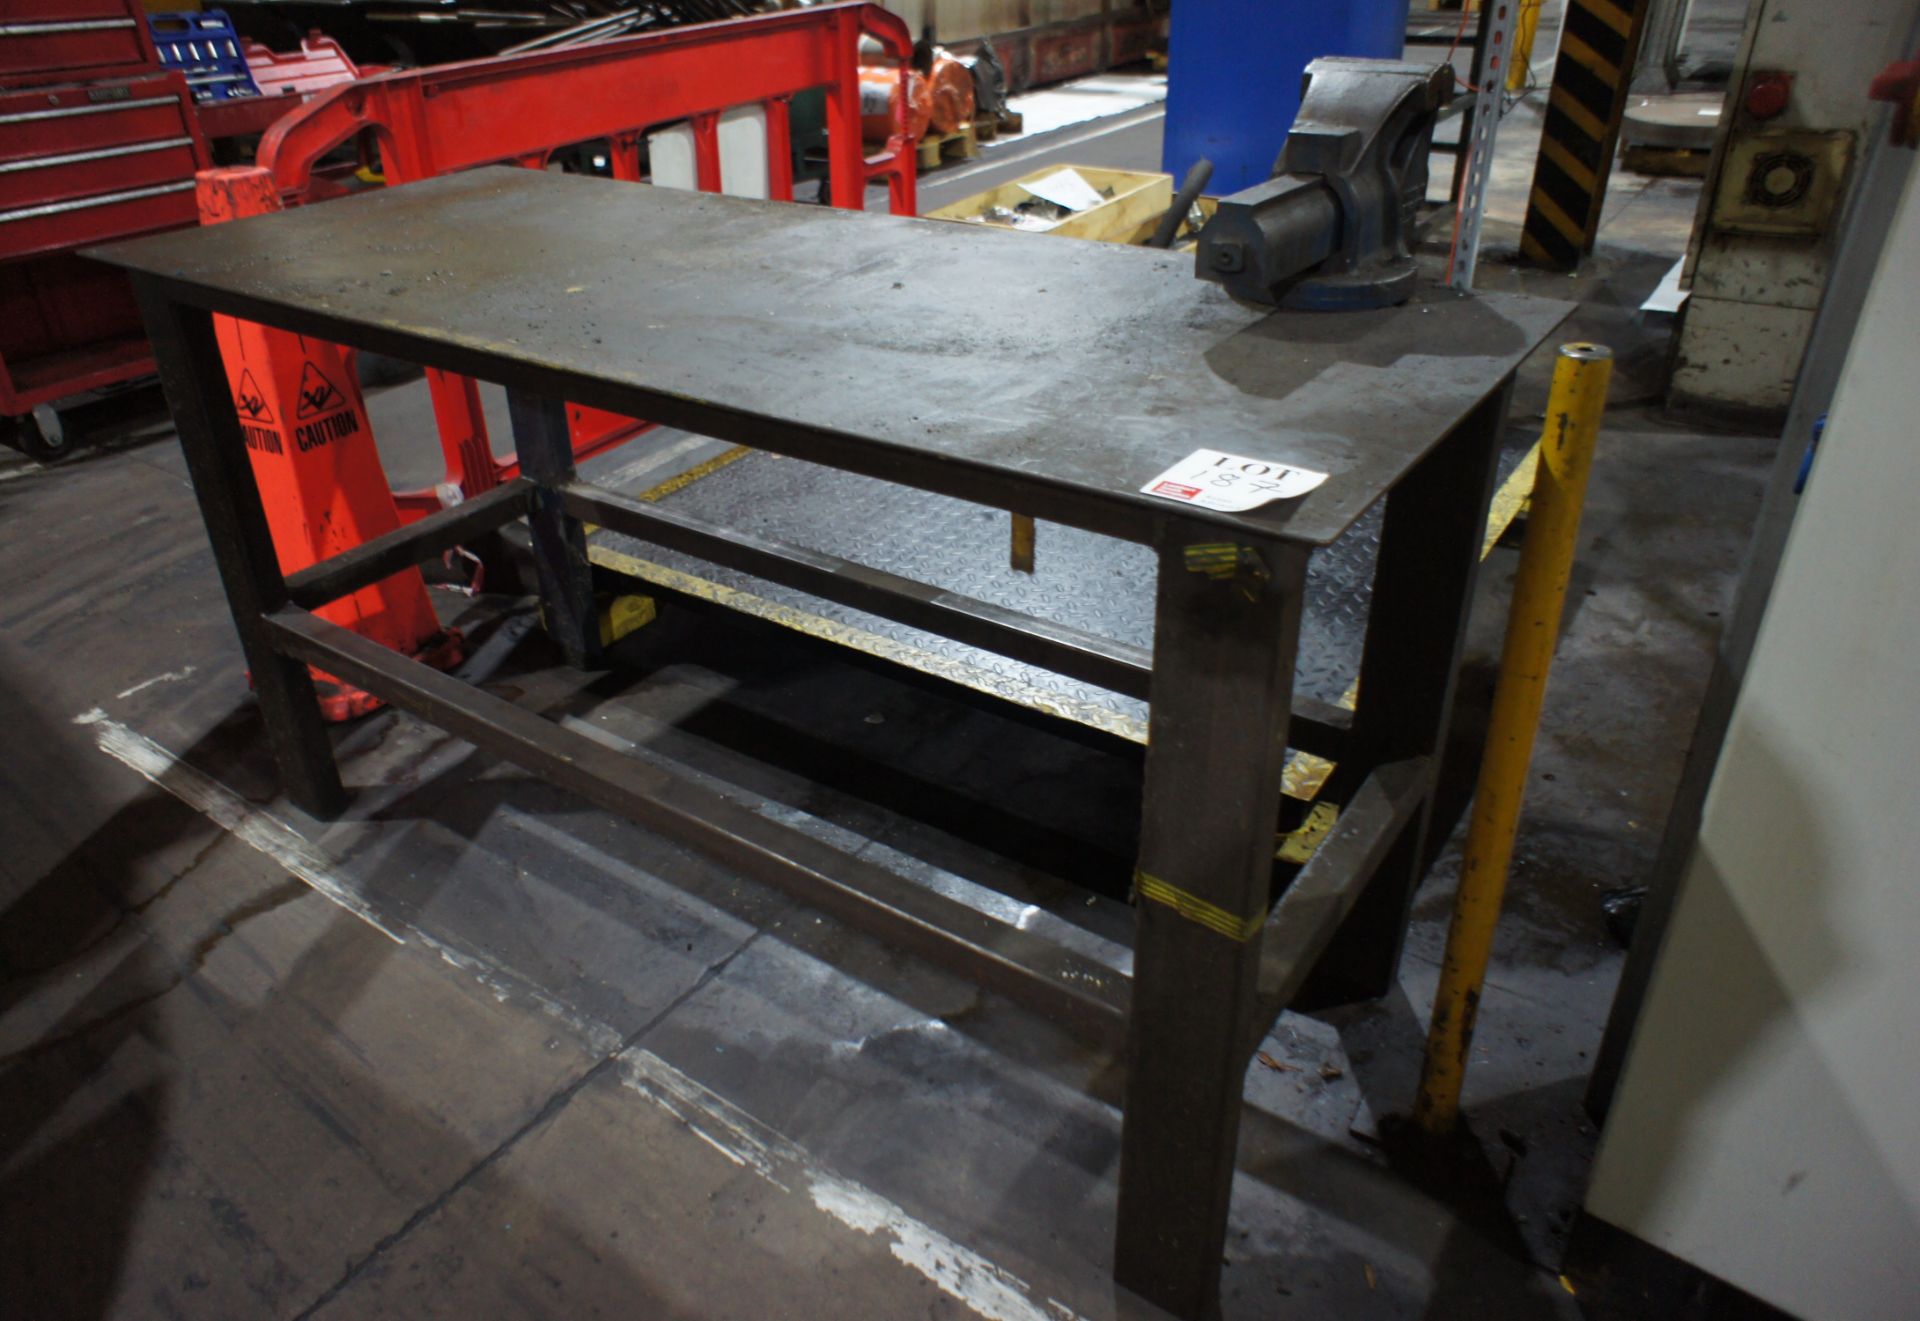 Steel fabricated work bench with engineers vice